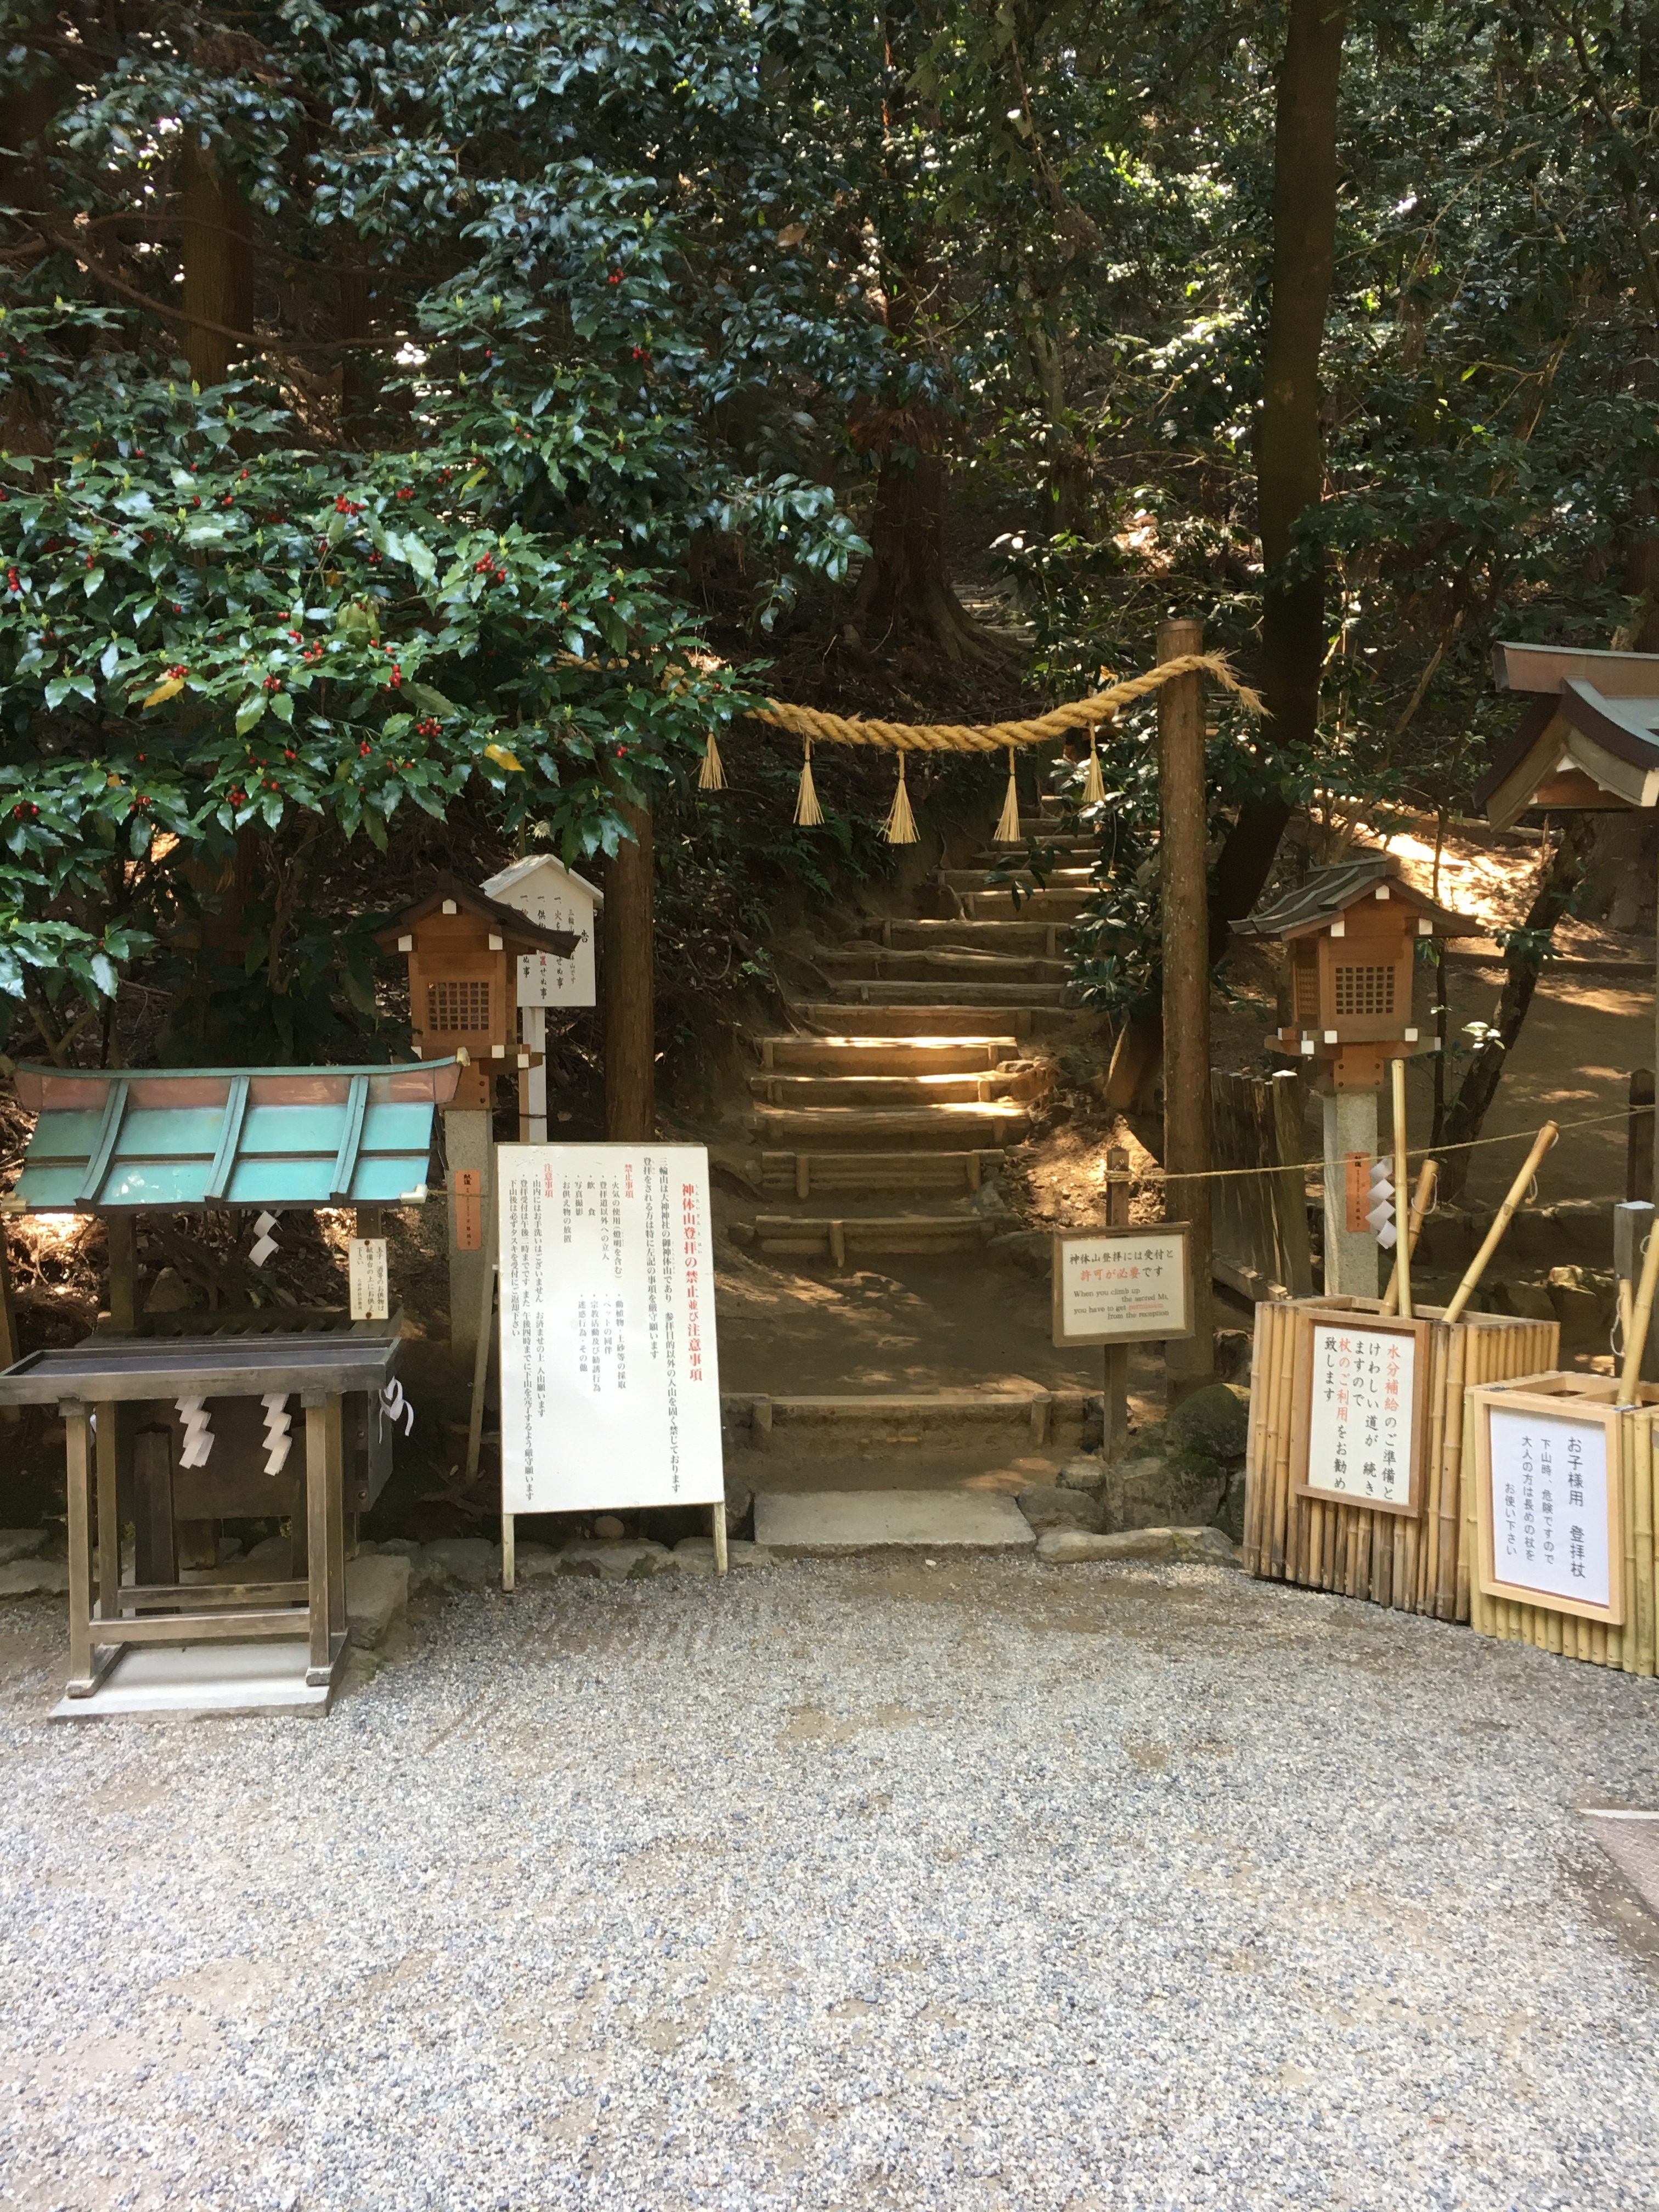 stairs on a mountain side with a sacred rope hanging over the entrance